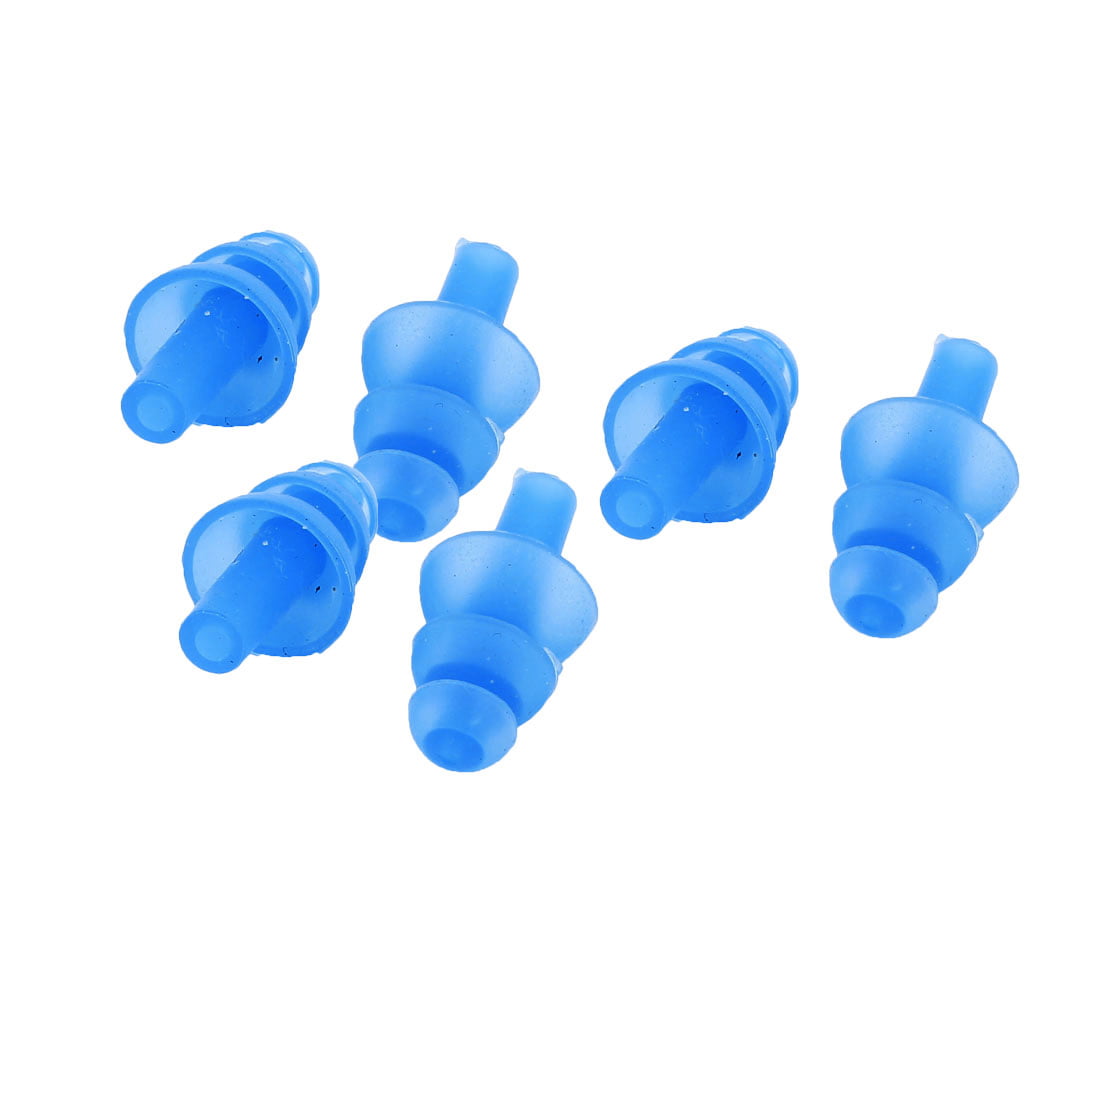 Blue Unisex Adults Swimming Ear Plug Soft Silicone Ears Plugs Swim Earplugs for Hearing Protection Safety 